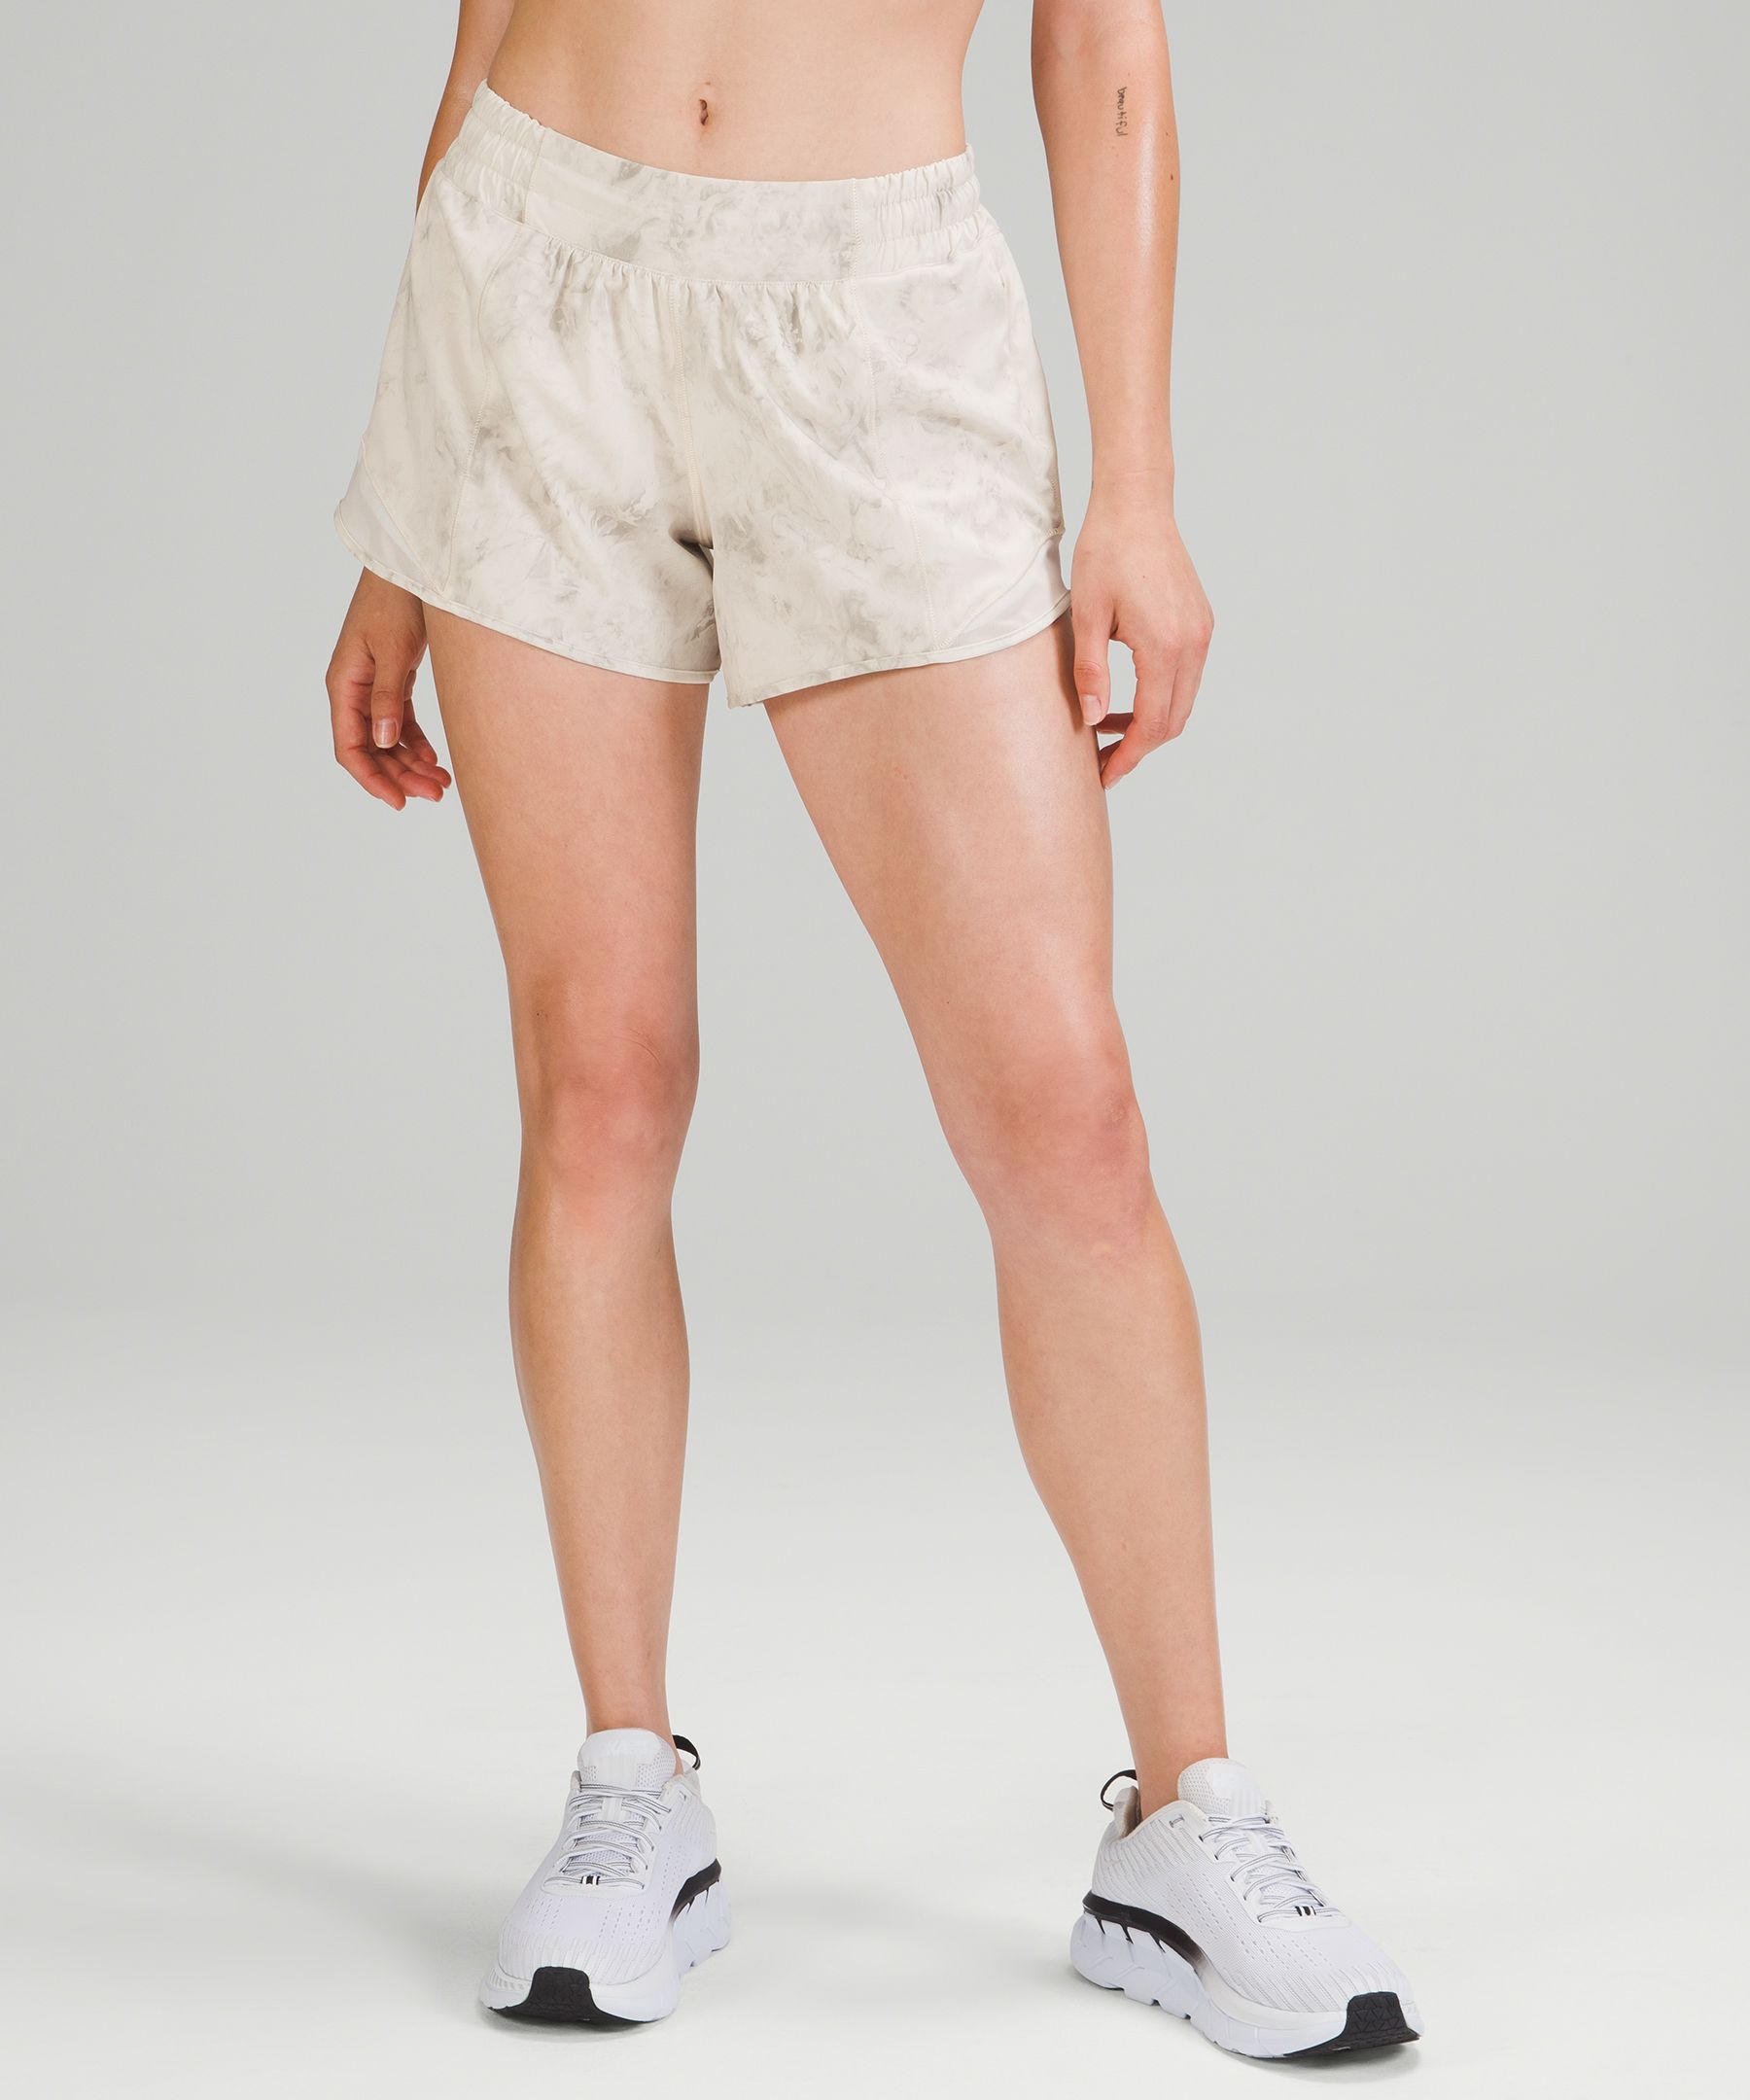 Lululemon Hotty Hot Low-rise Lined Shorts 4" In Aquila White Opal /white Opal